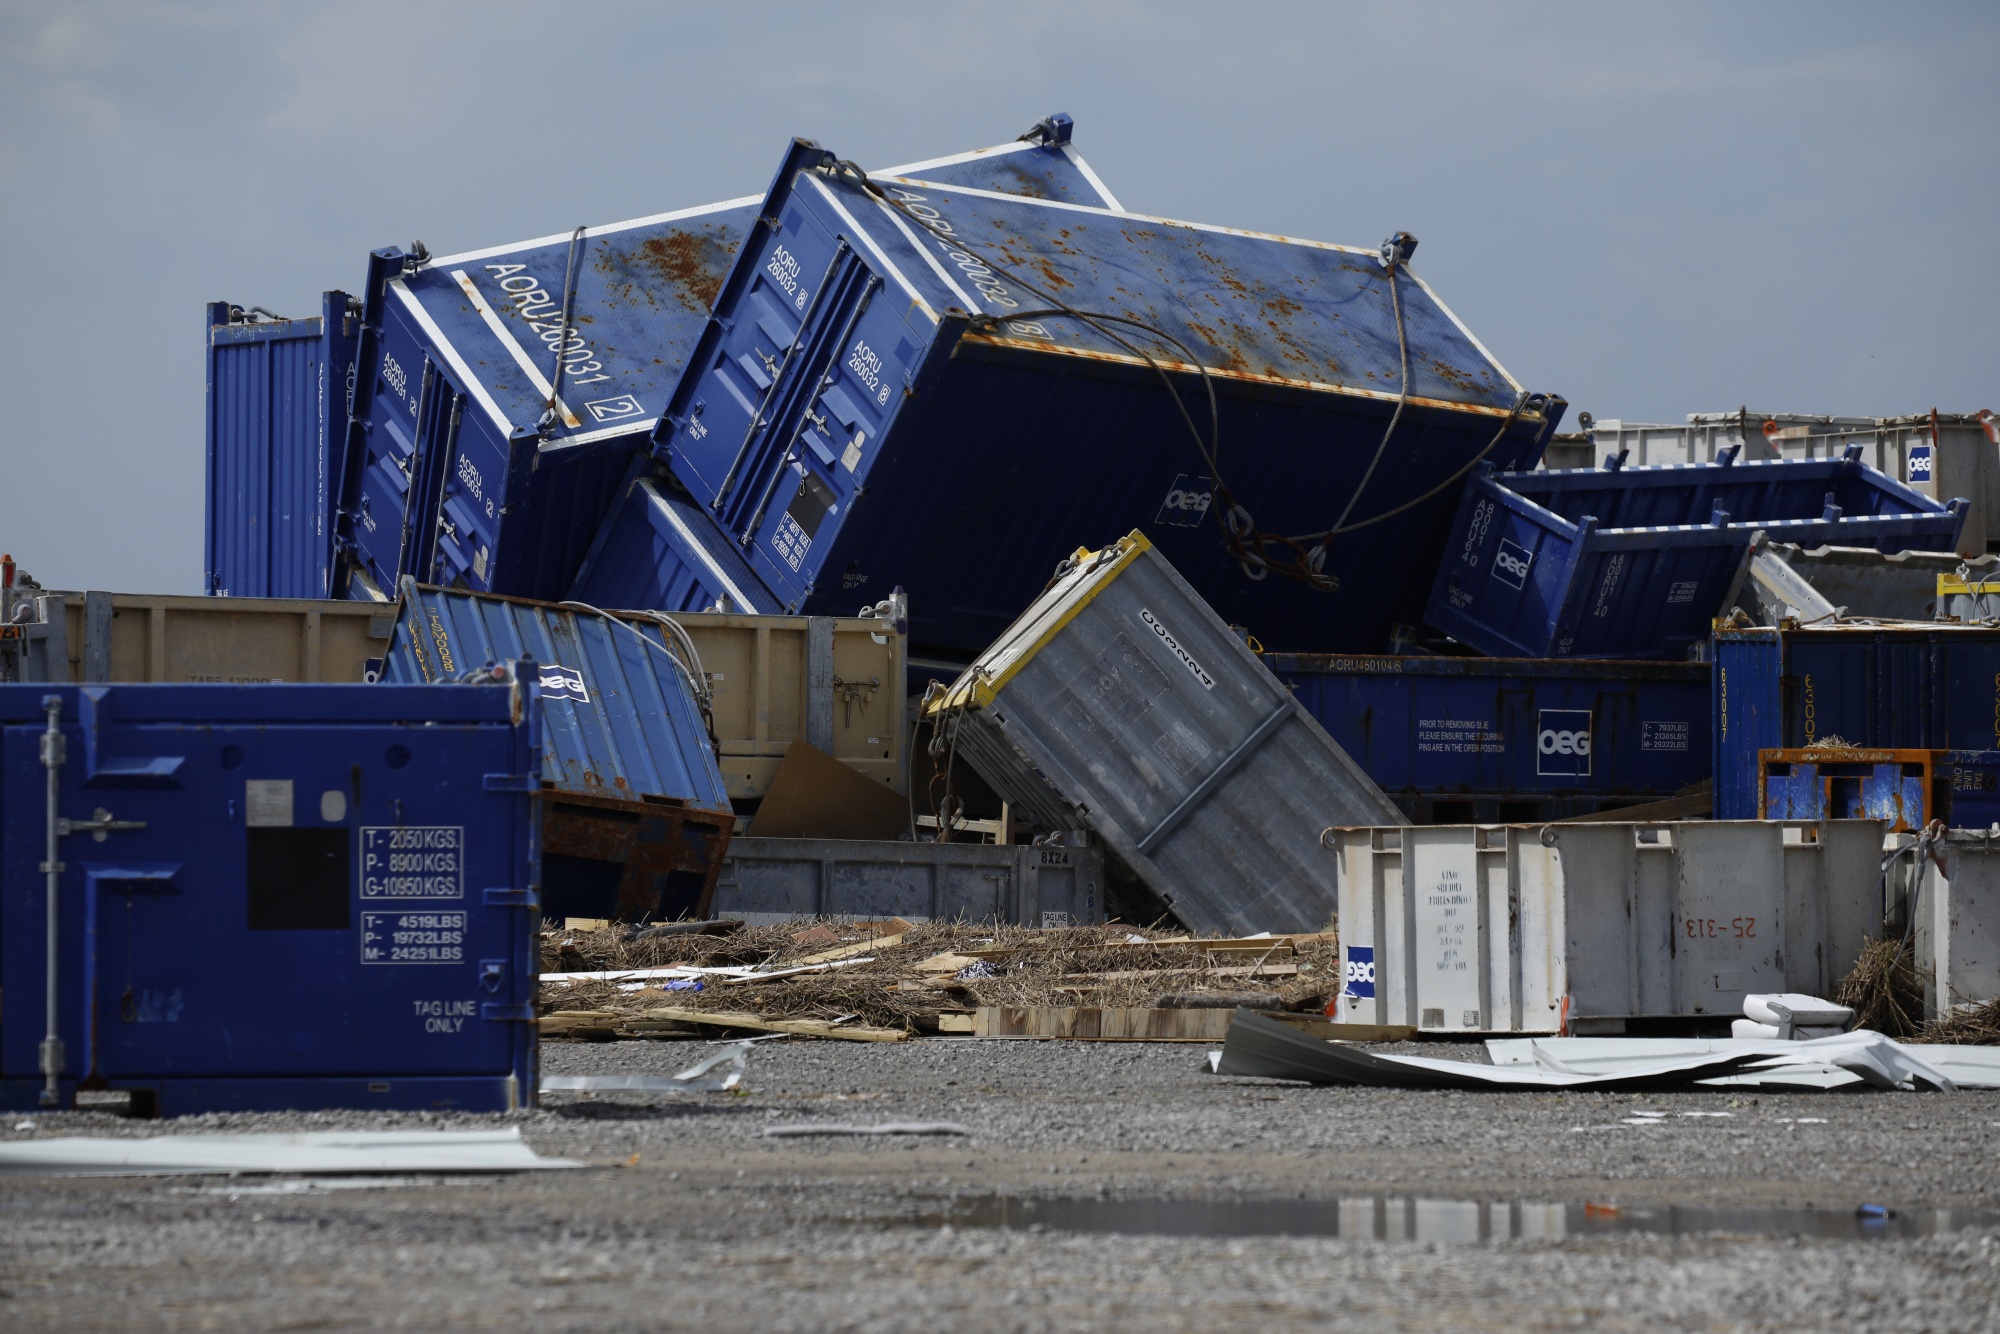 Offshore oil supply containers are strewn about after Hurricane Ida's storm surge swept through Port Fourchon, Louisiana.